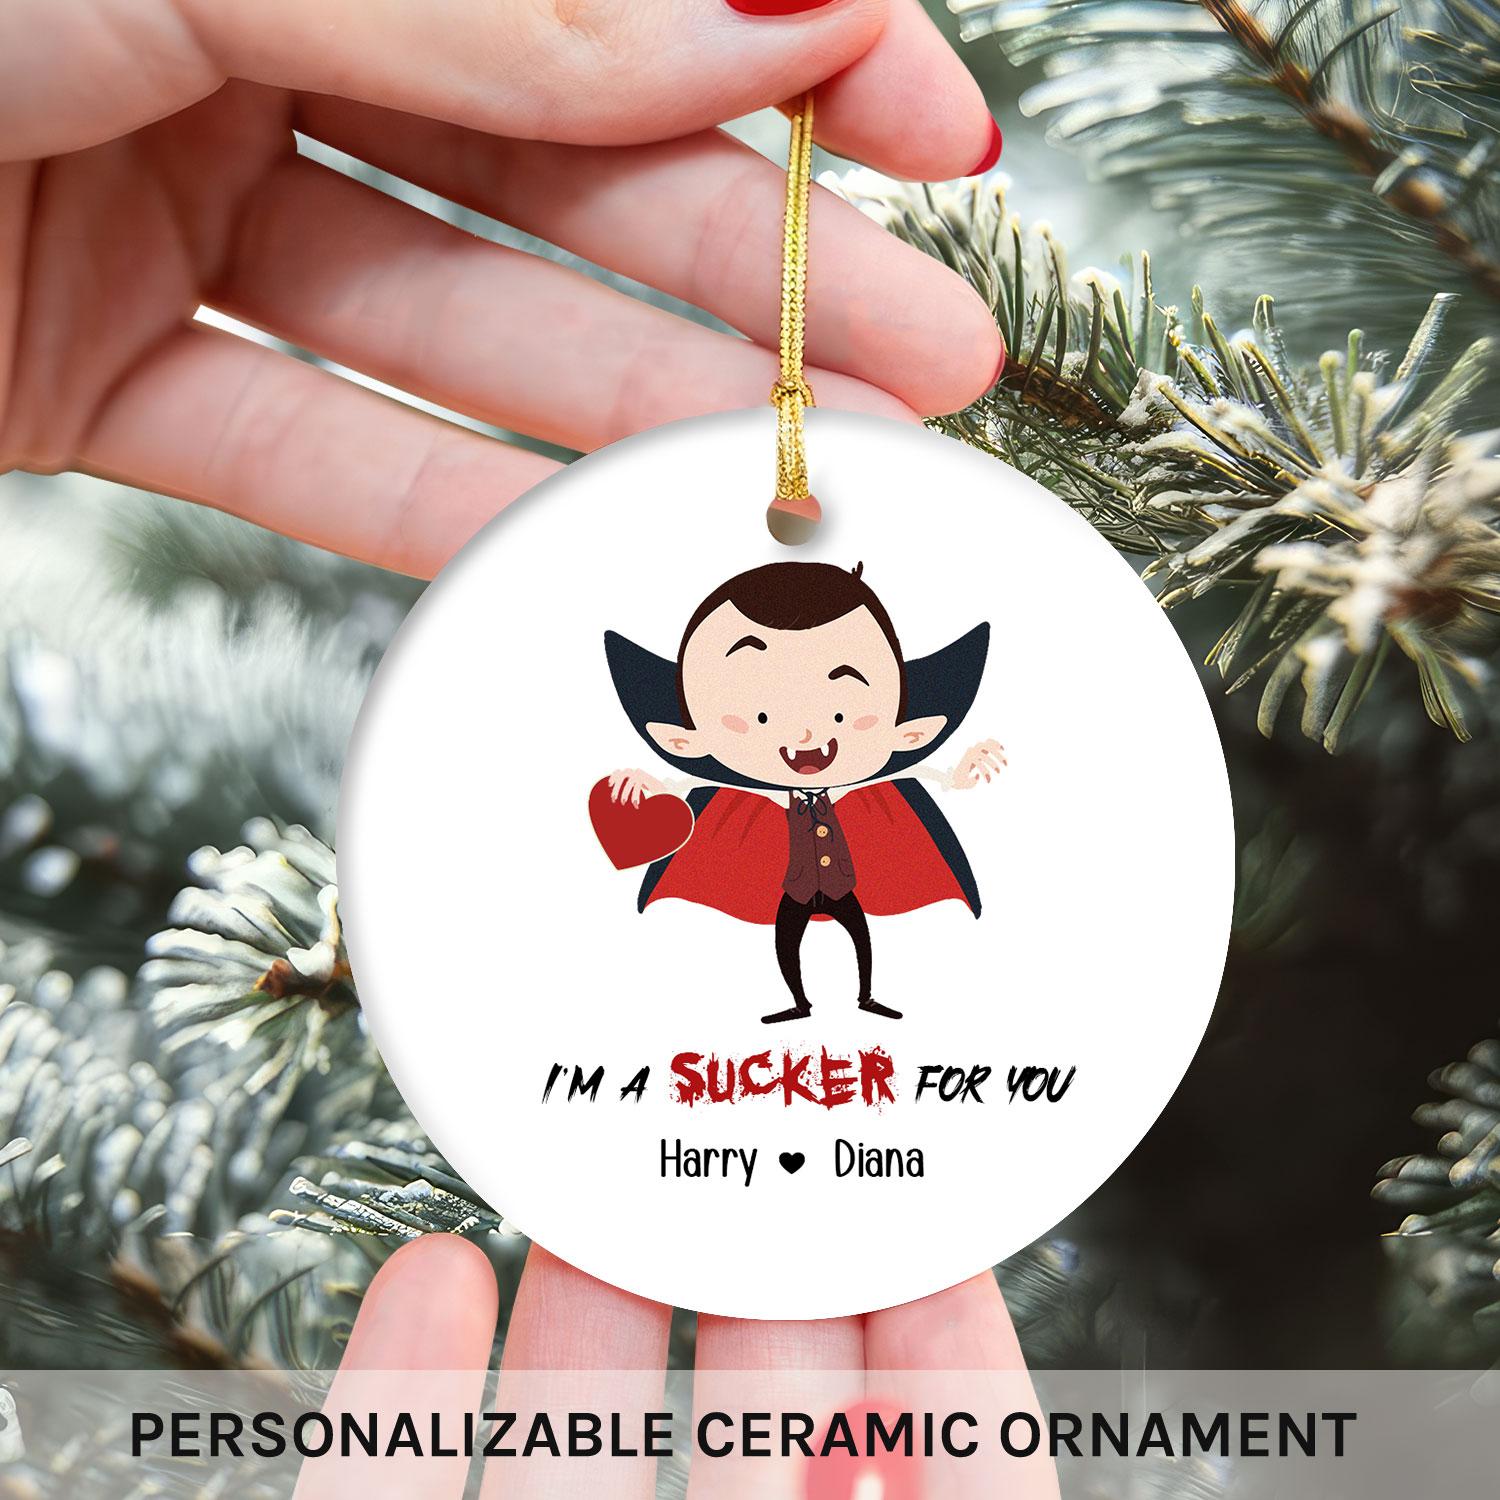 I'm A Sucker For You - Personalized Anniversary or Halloween gift for Boyfriend or Girlfriend - Custom Circle Ceramic Ornament - MyMindfulGifts